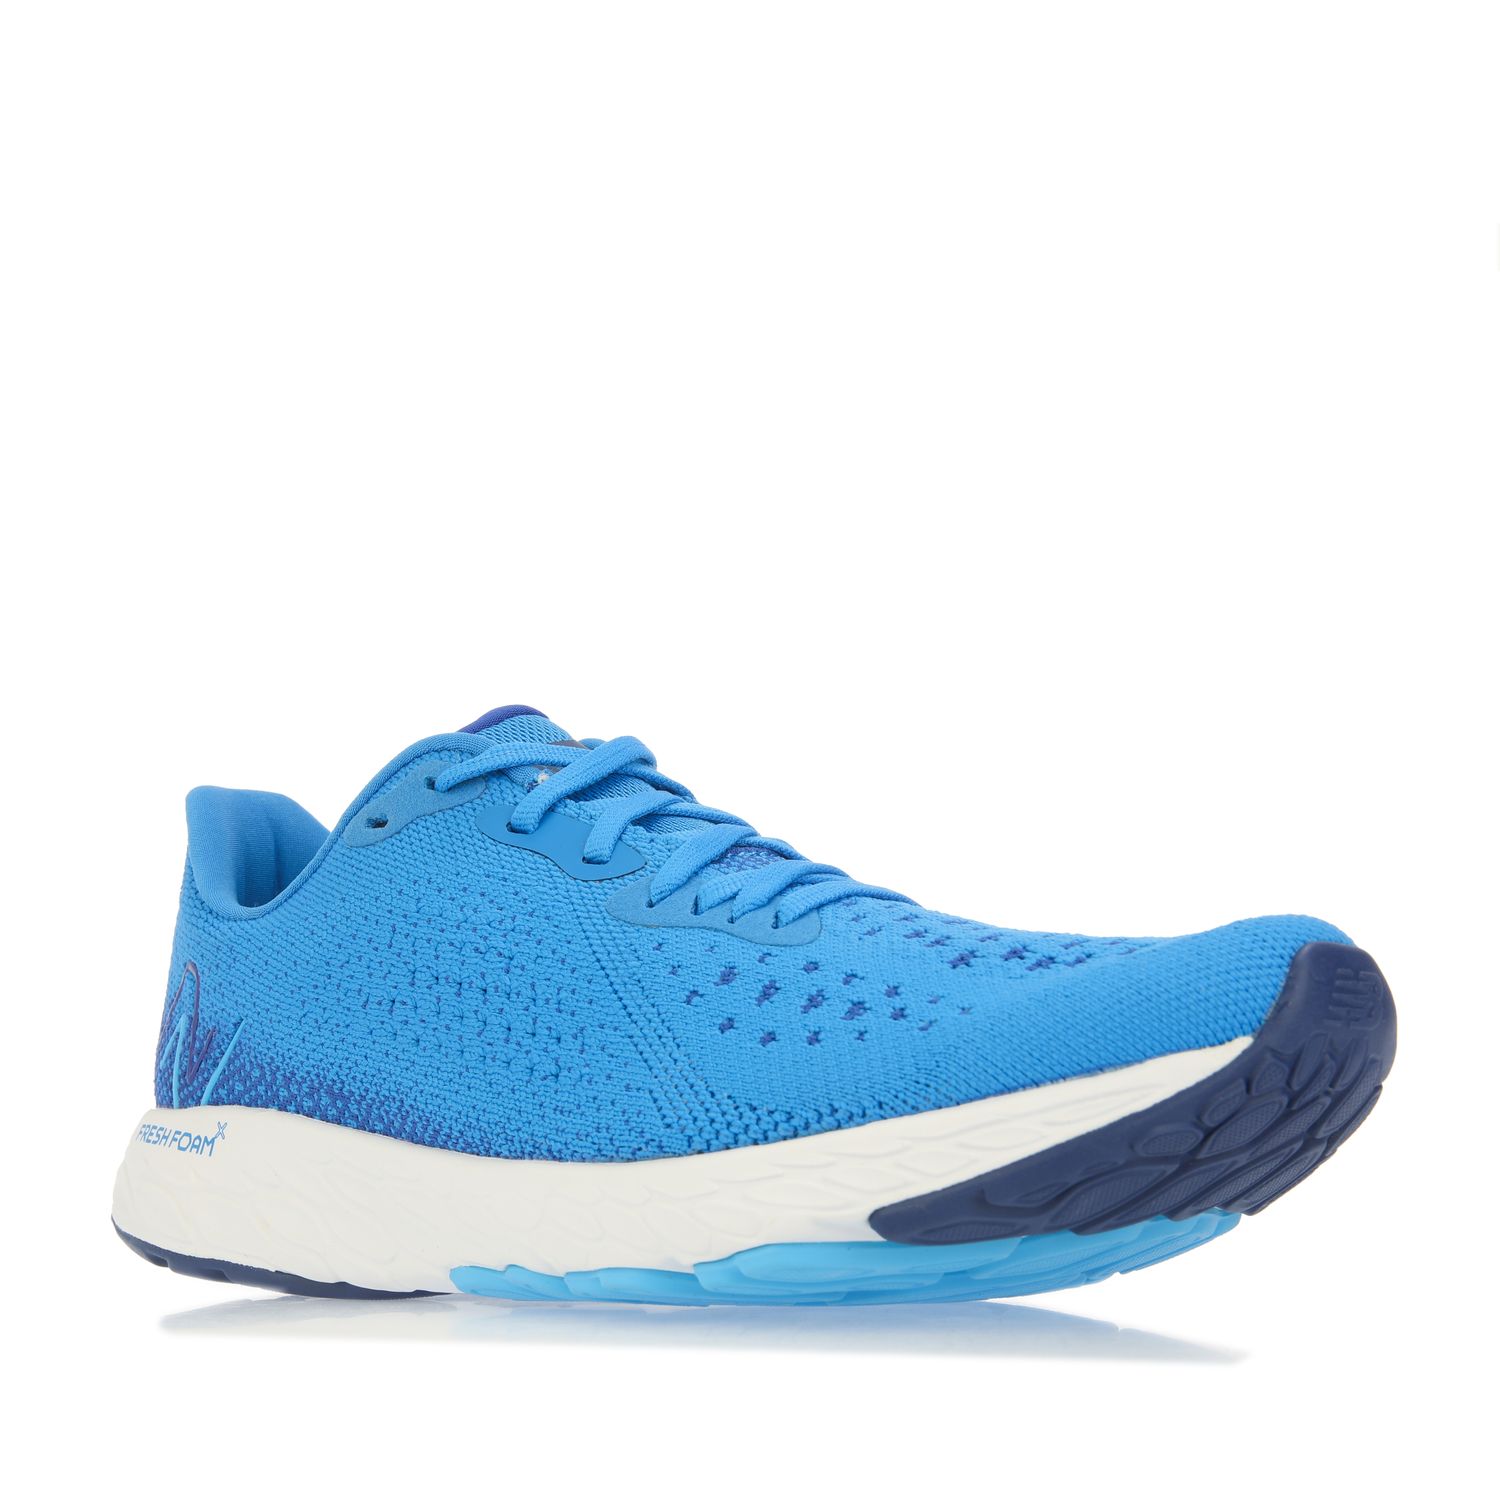 Blue New Balance Mens Fresh Foam X Tempo v2 Running Shoes - Get The Label